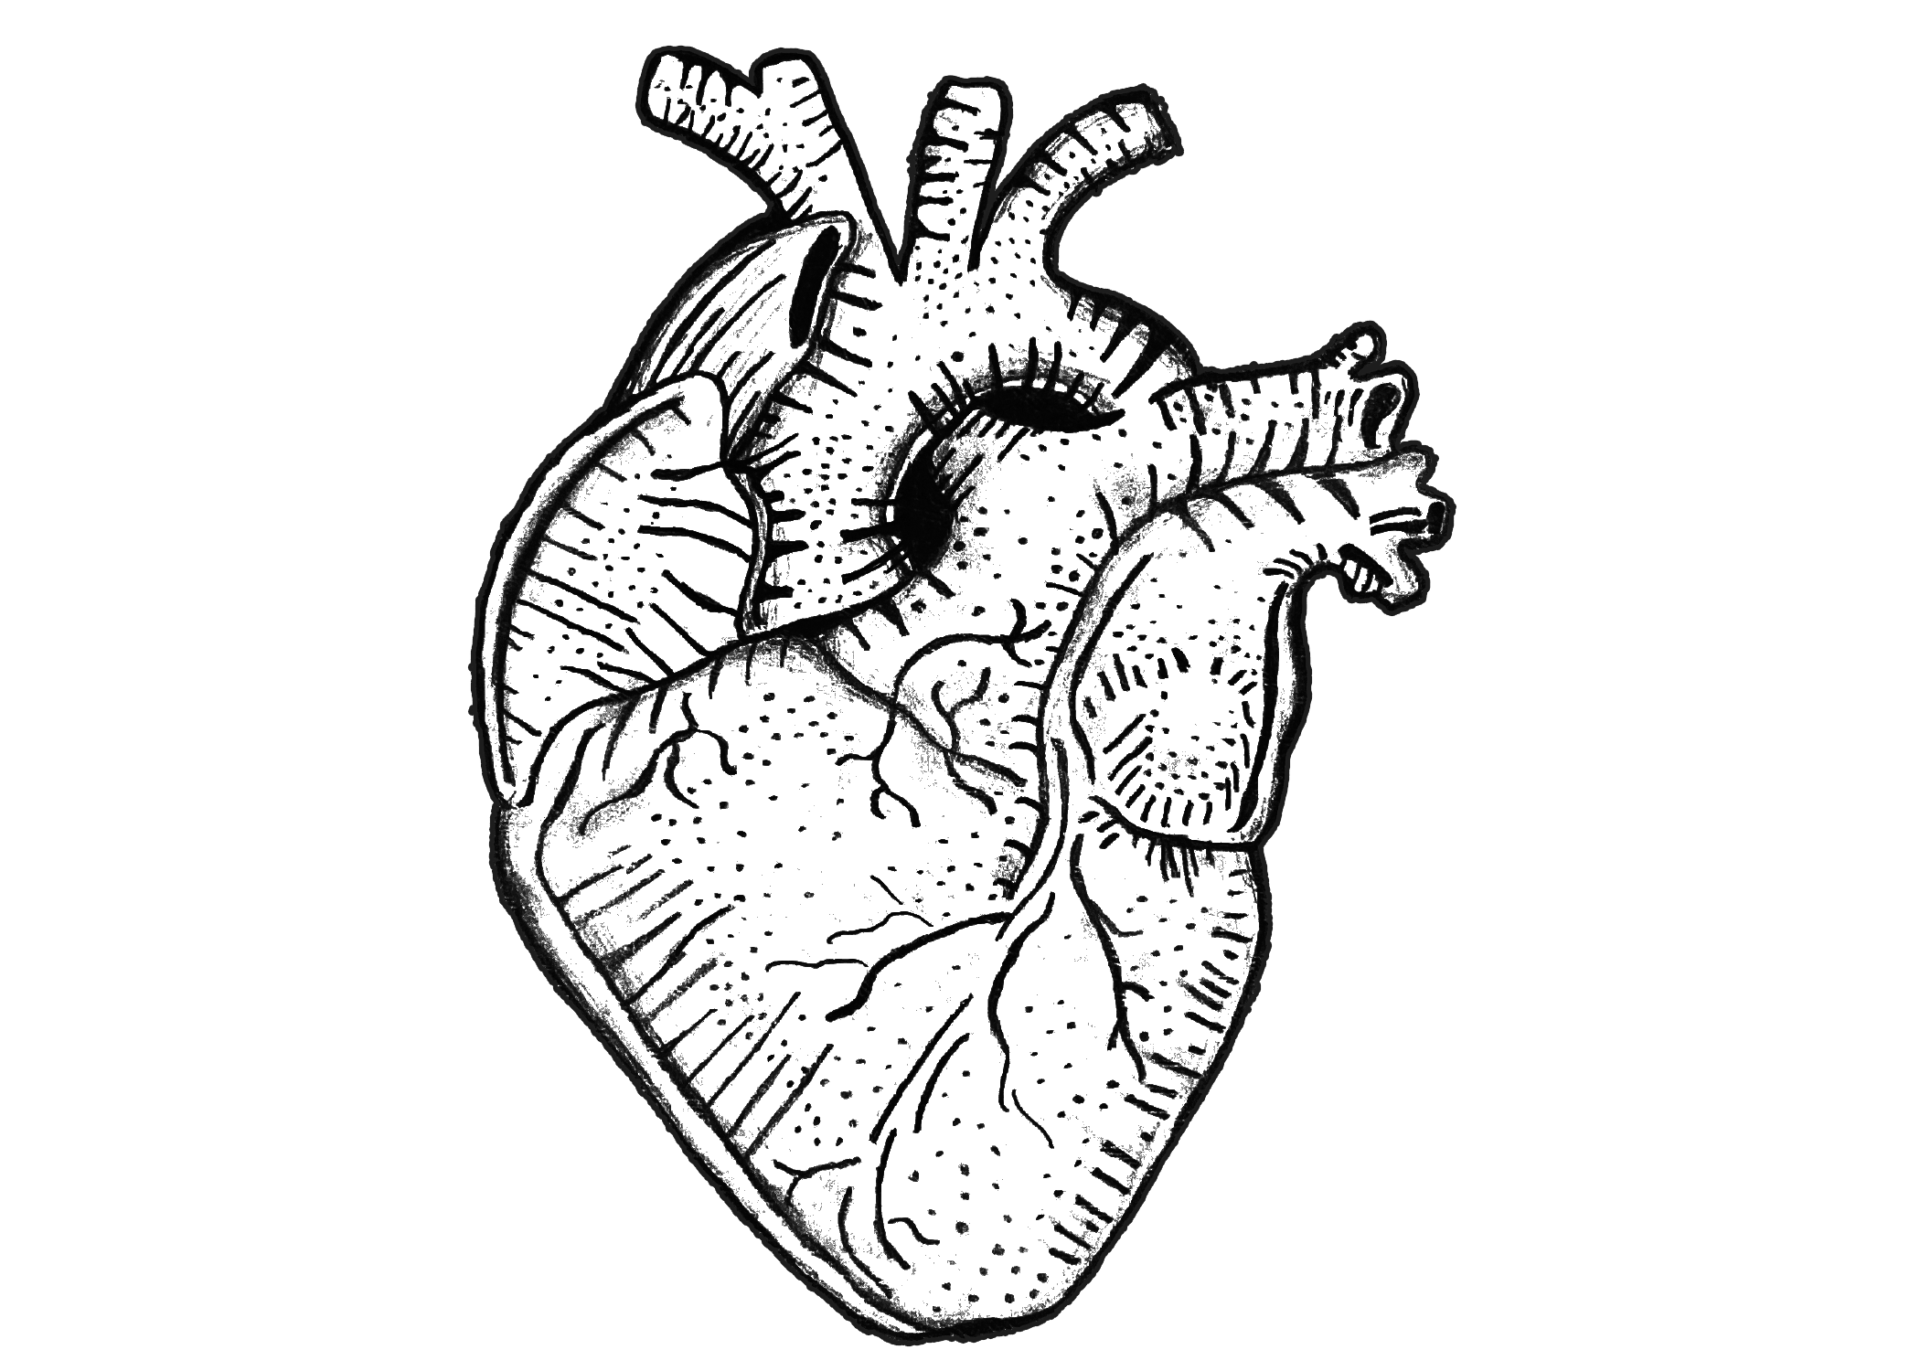 Pencil illustration of an anatomical heart